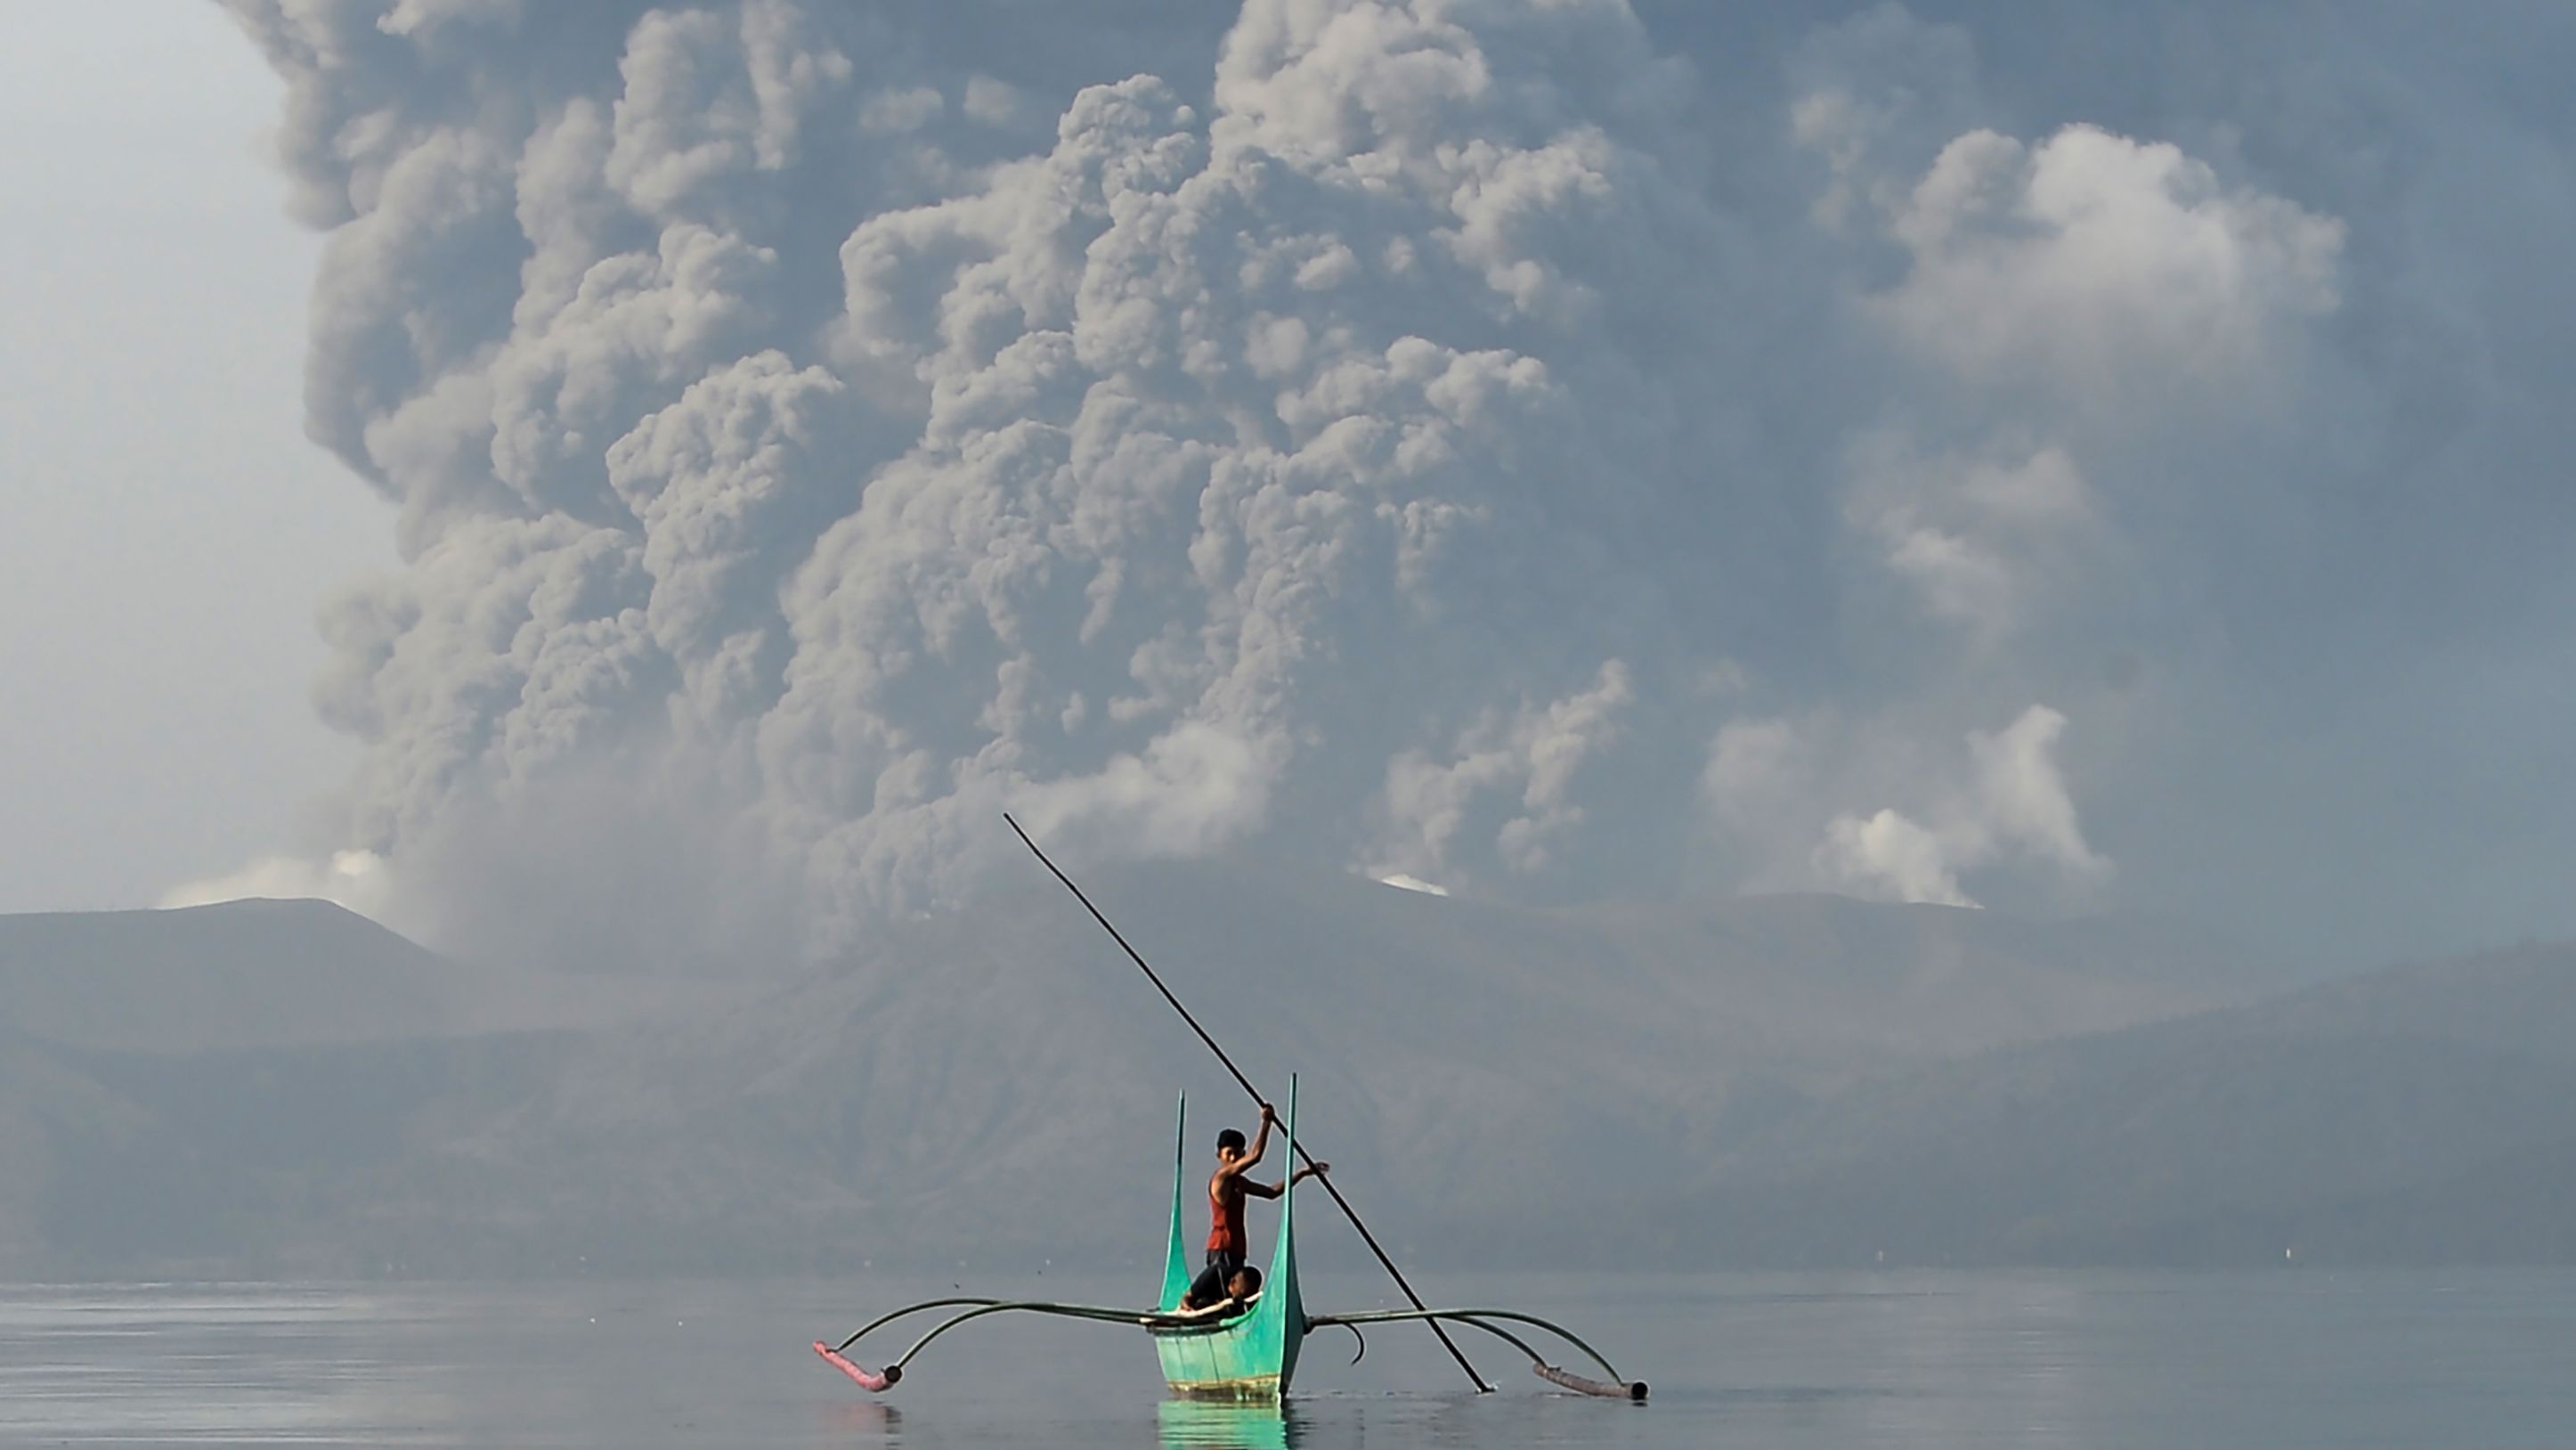 A youth rides an outrigger canoe while the volcano spews ash on January 13.